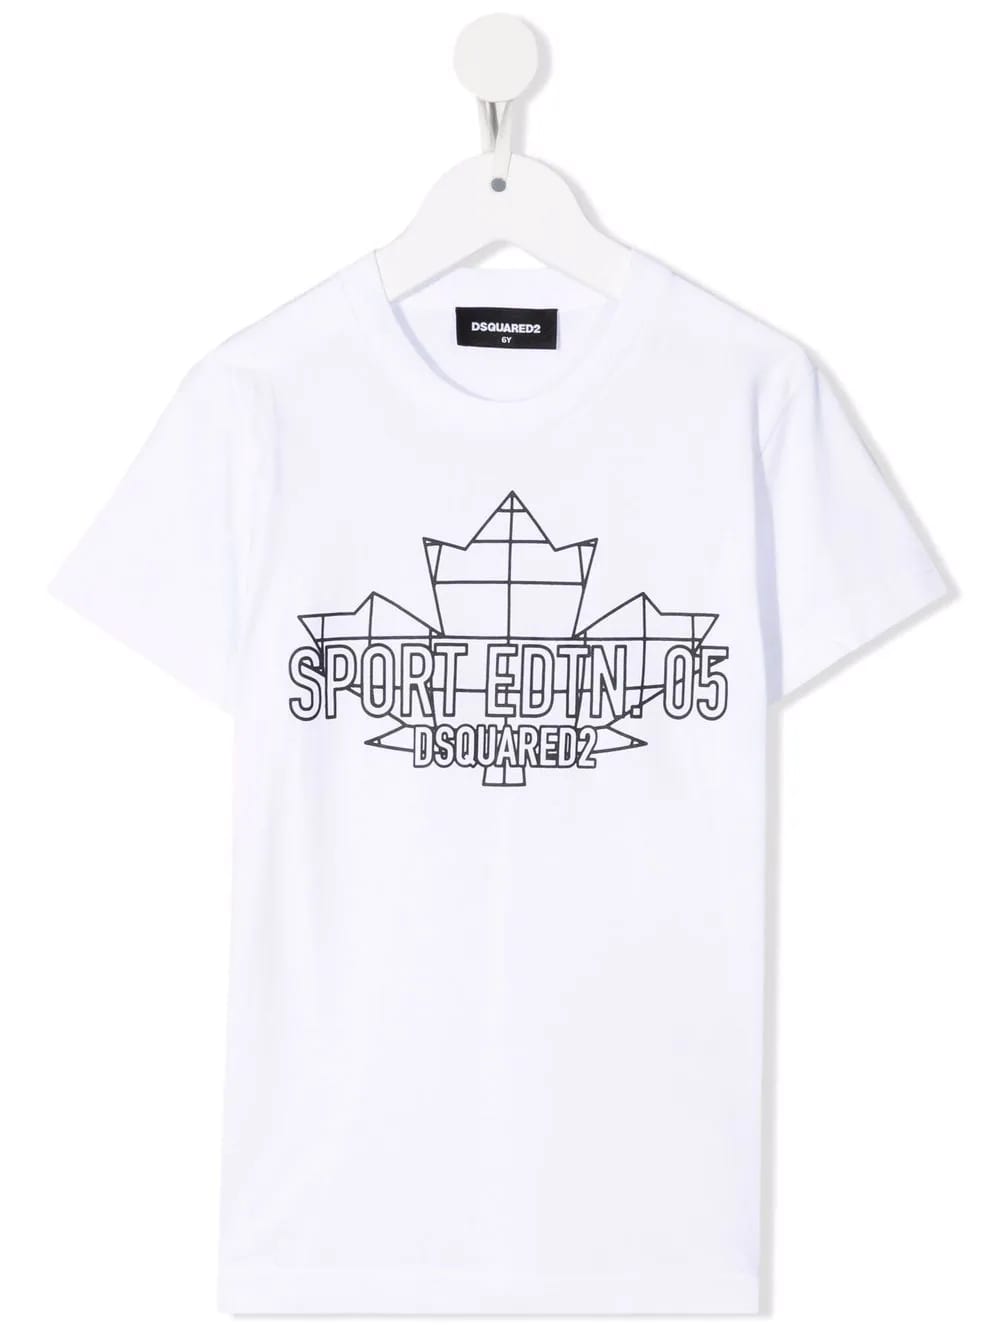 Dsquared2 White Kids T-shirt With Sport Edtn.05 Print